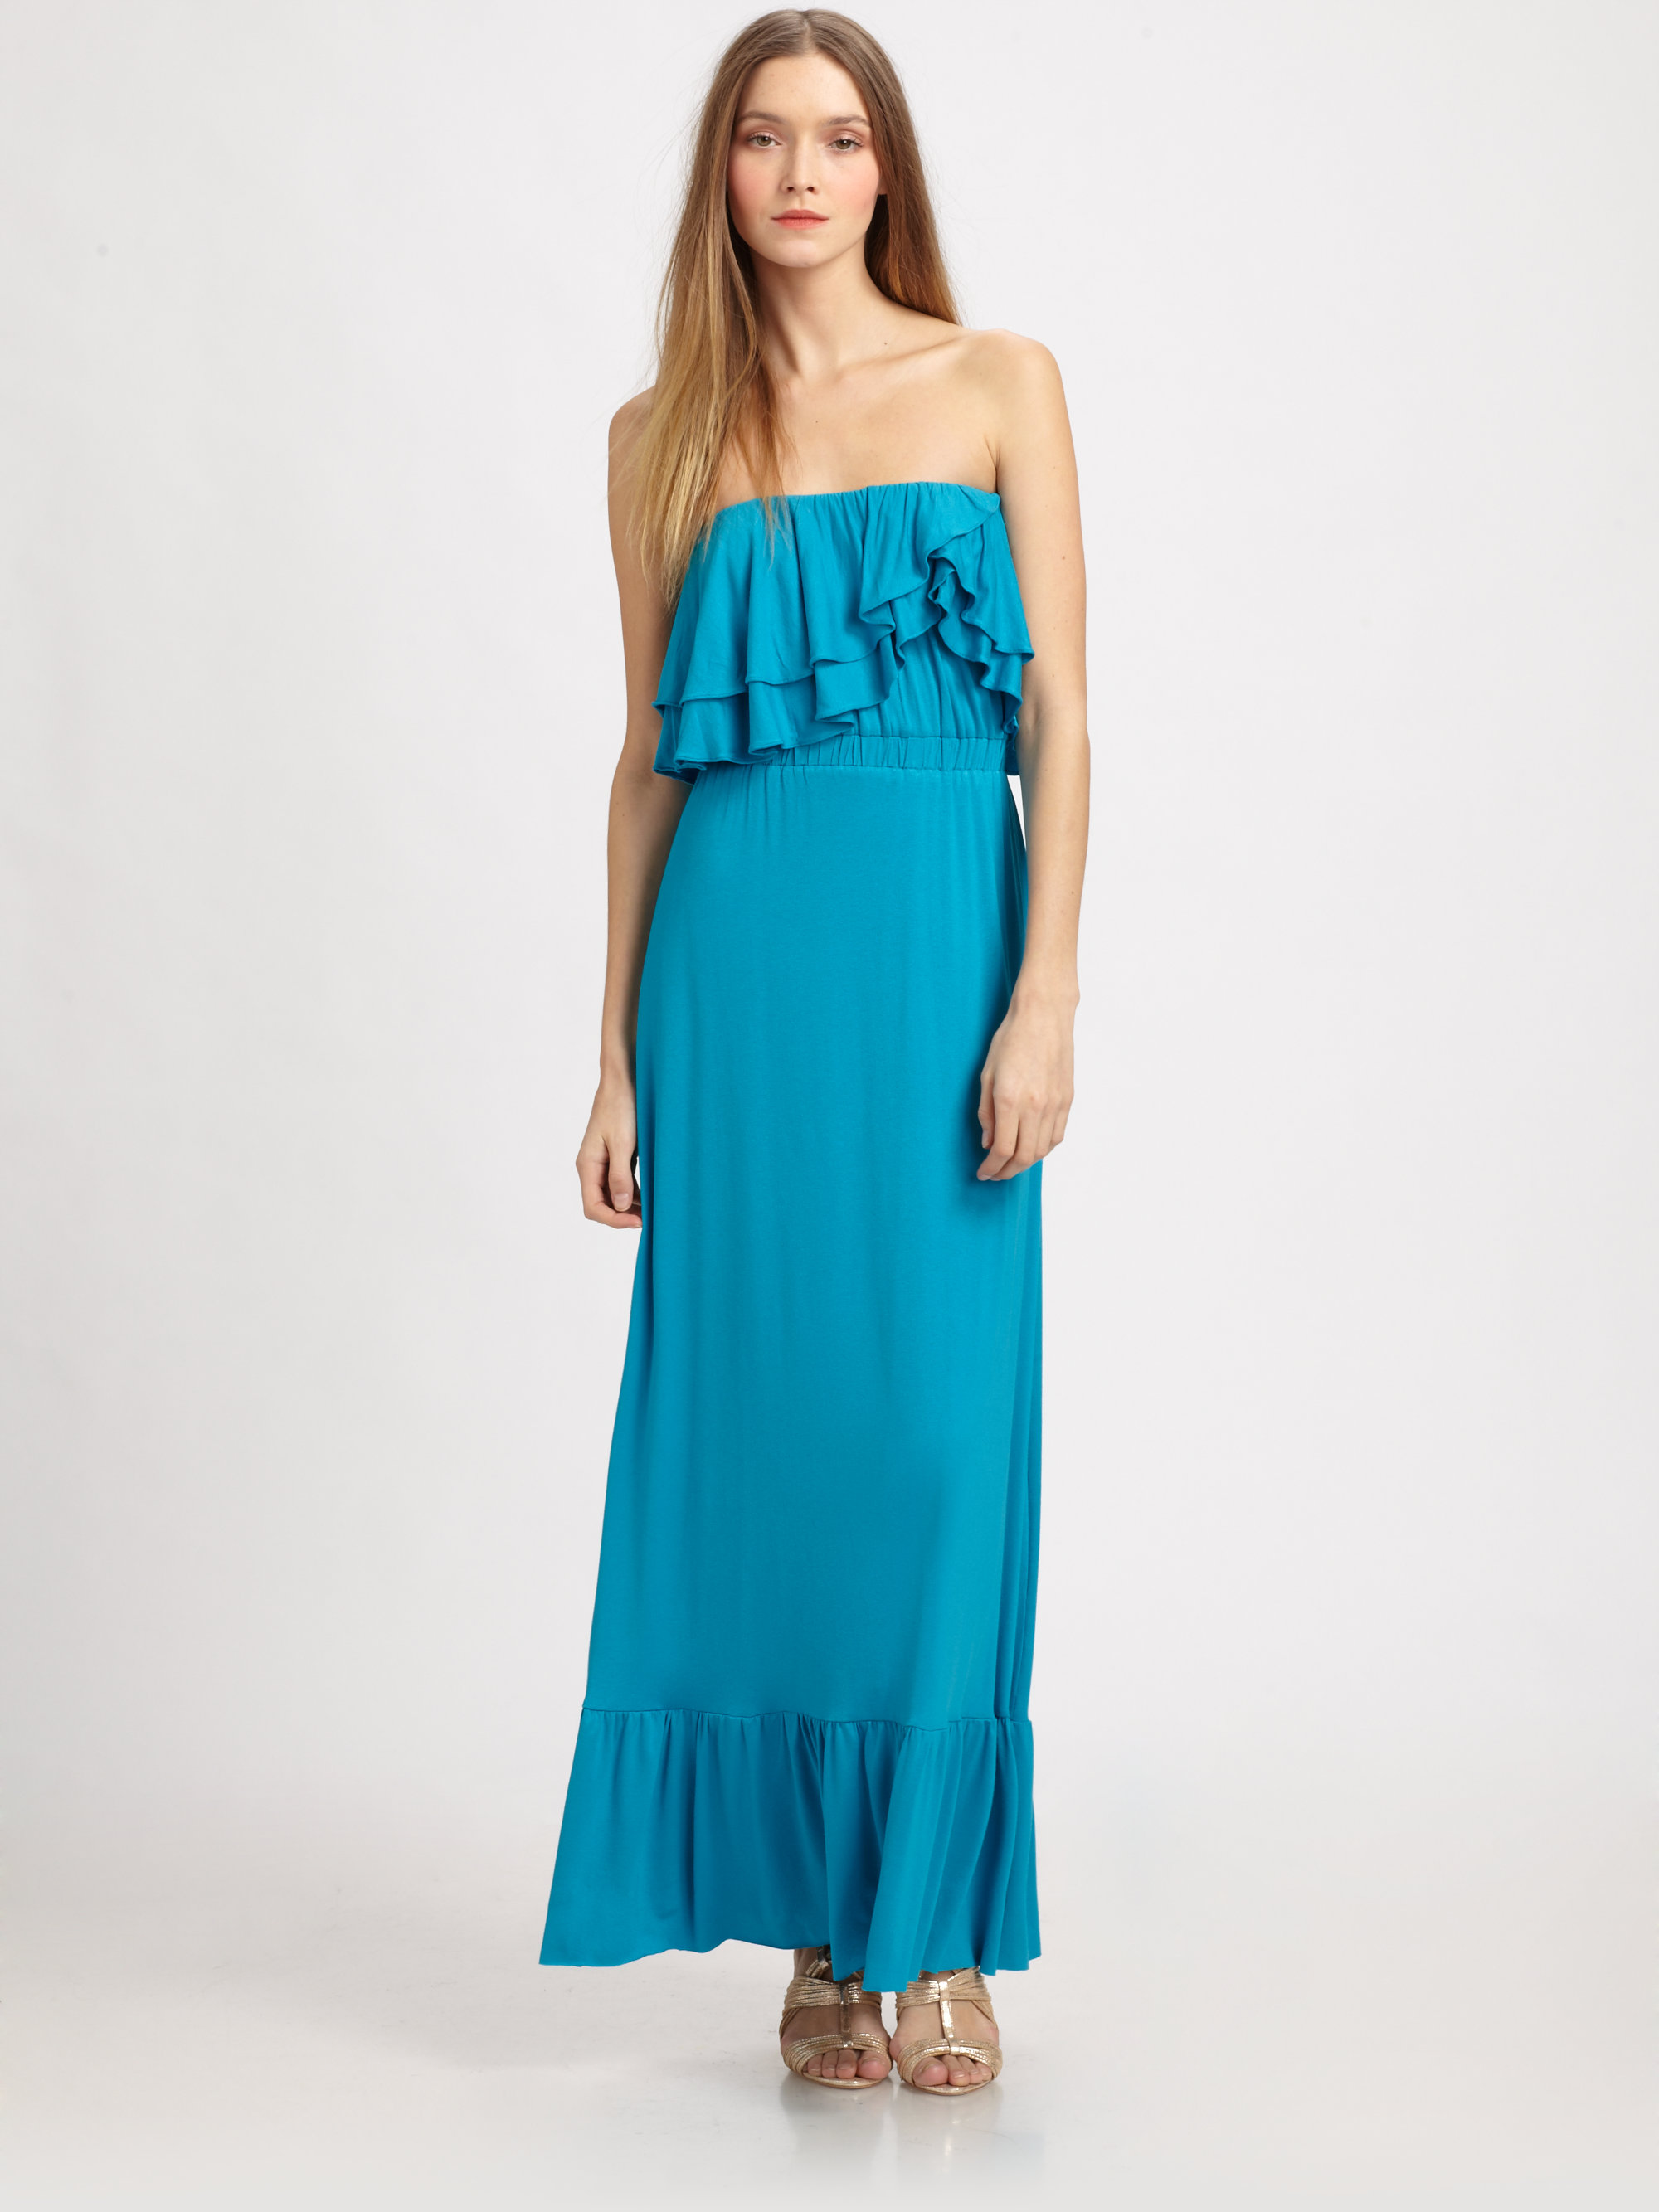 Lyst - T-Bags Strapless Ruffled Maxi Dress in Blue